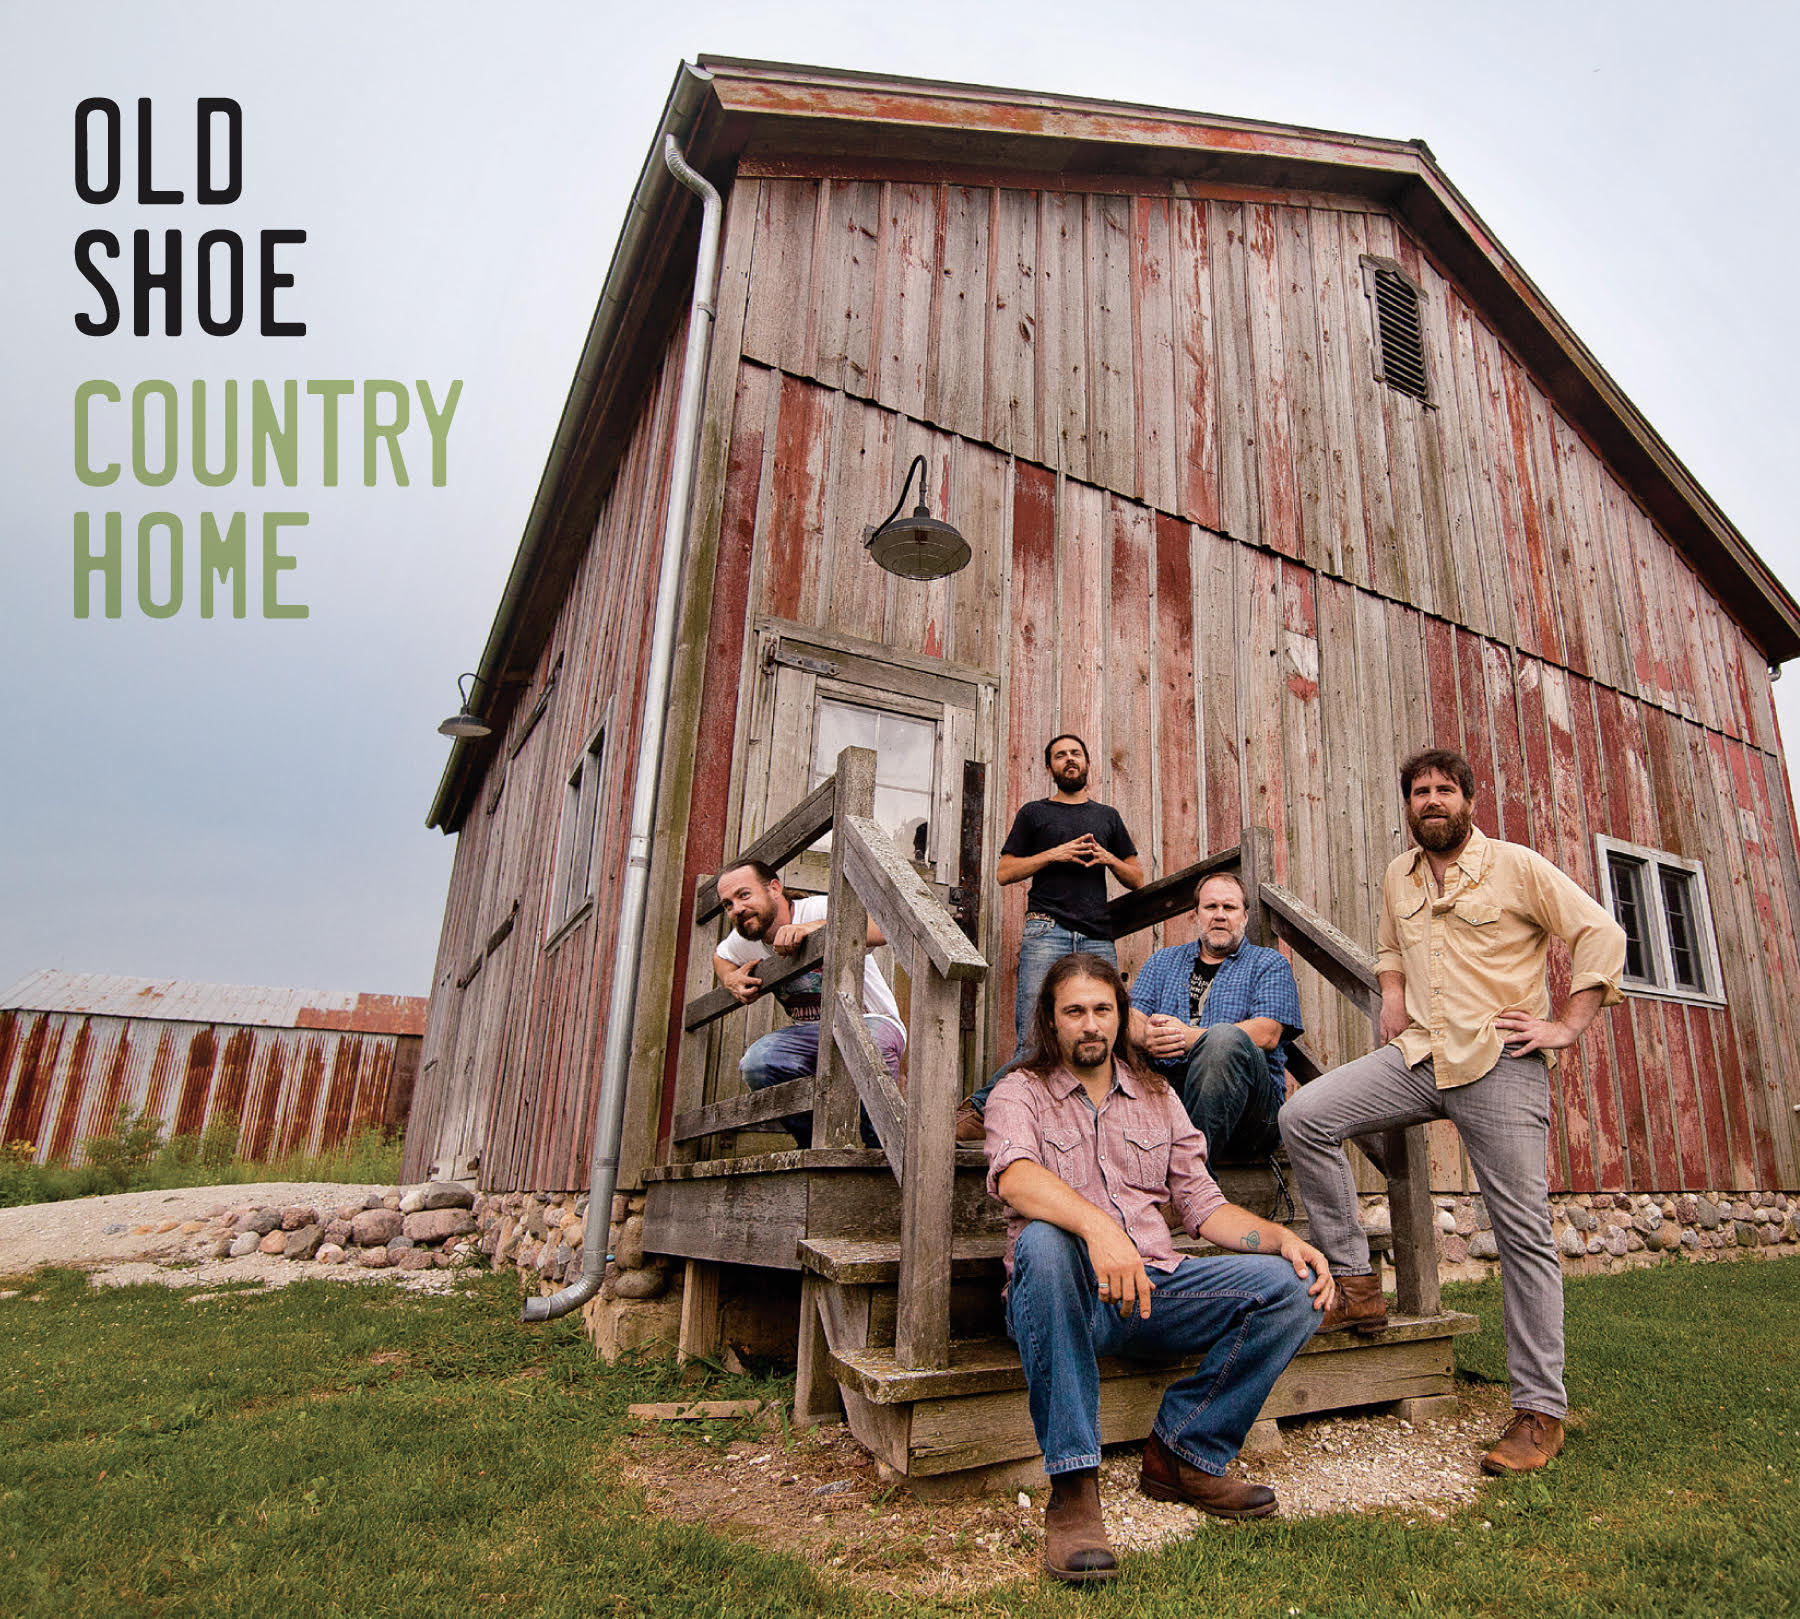 Old Shoe announces album 'Country Home'